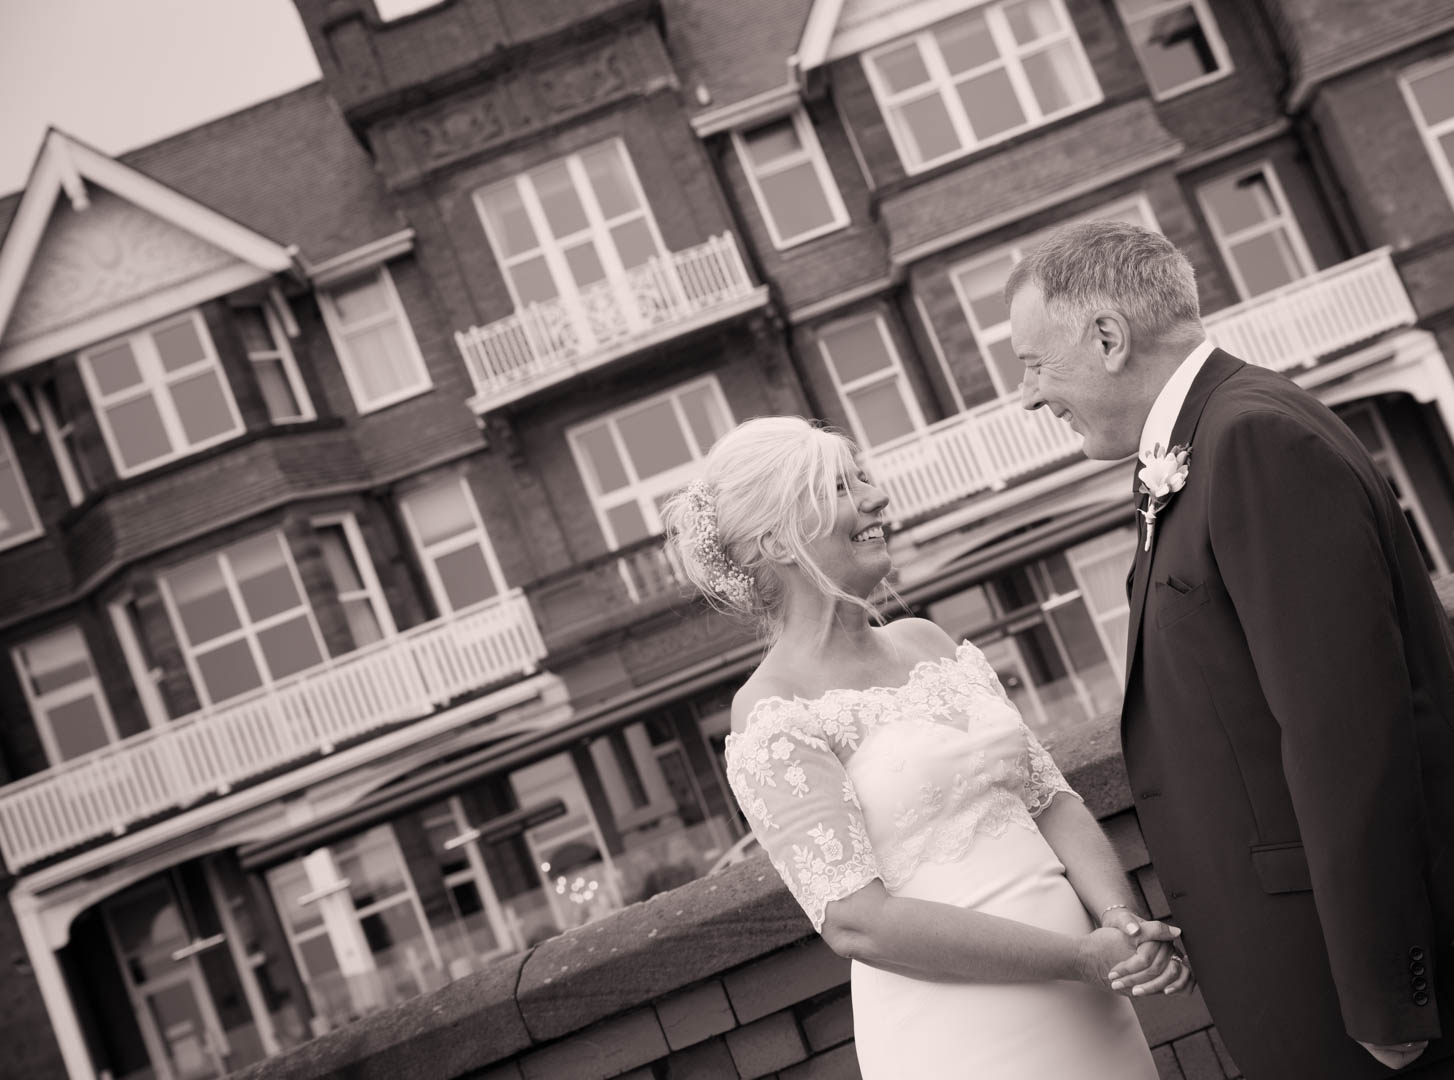 Paul and Louise's wedding photography in Lytham St Annes (67 of 70)